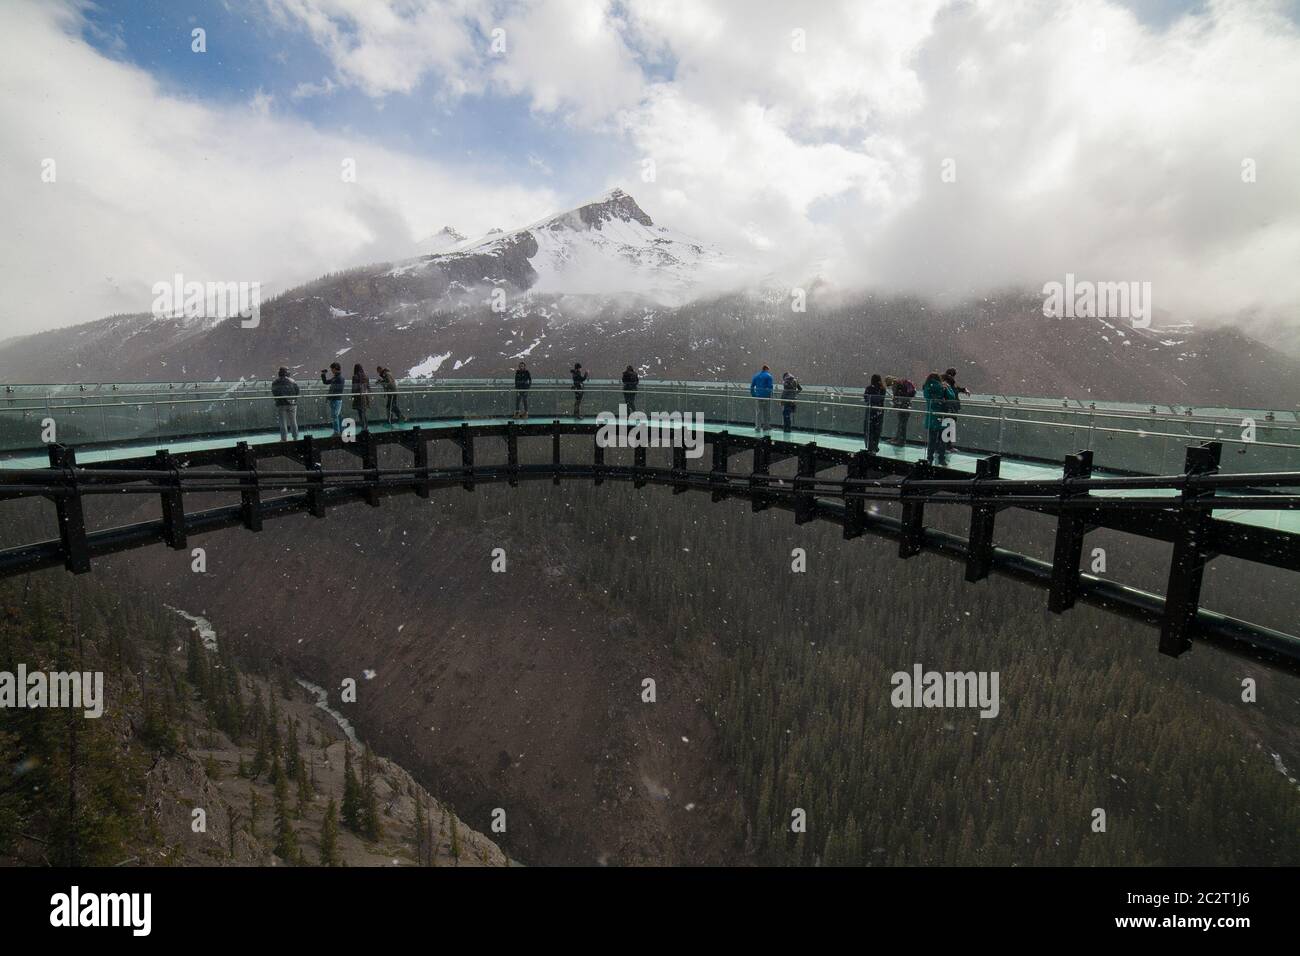 The spectacular Columbia Icefield Skywalk along the Icefield Parkway, Alberta, Canada Stock Photo